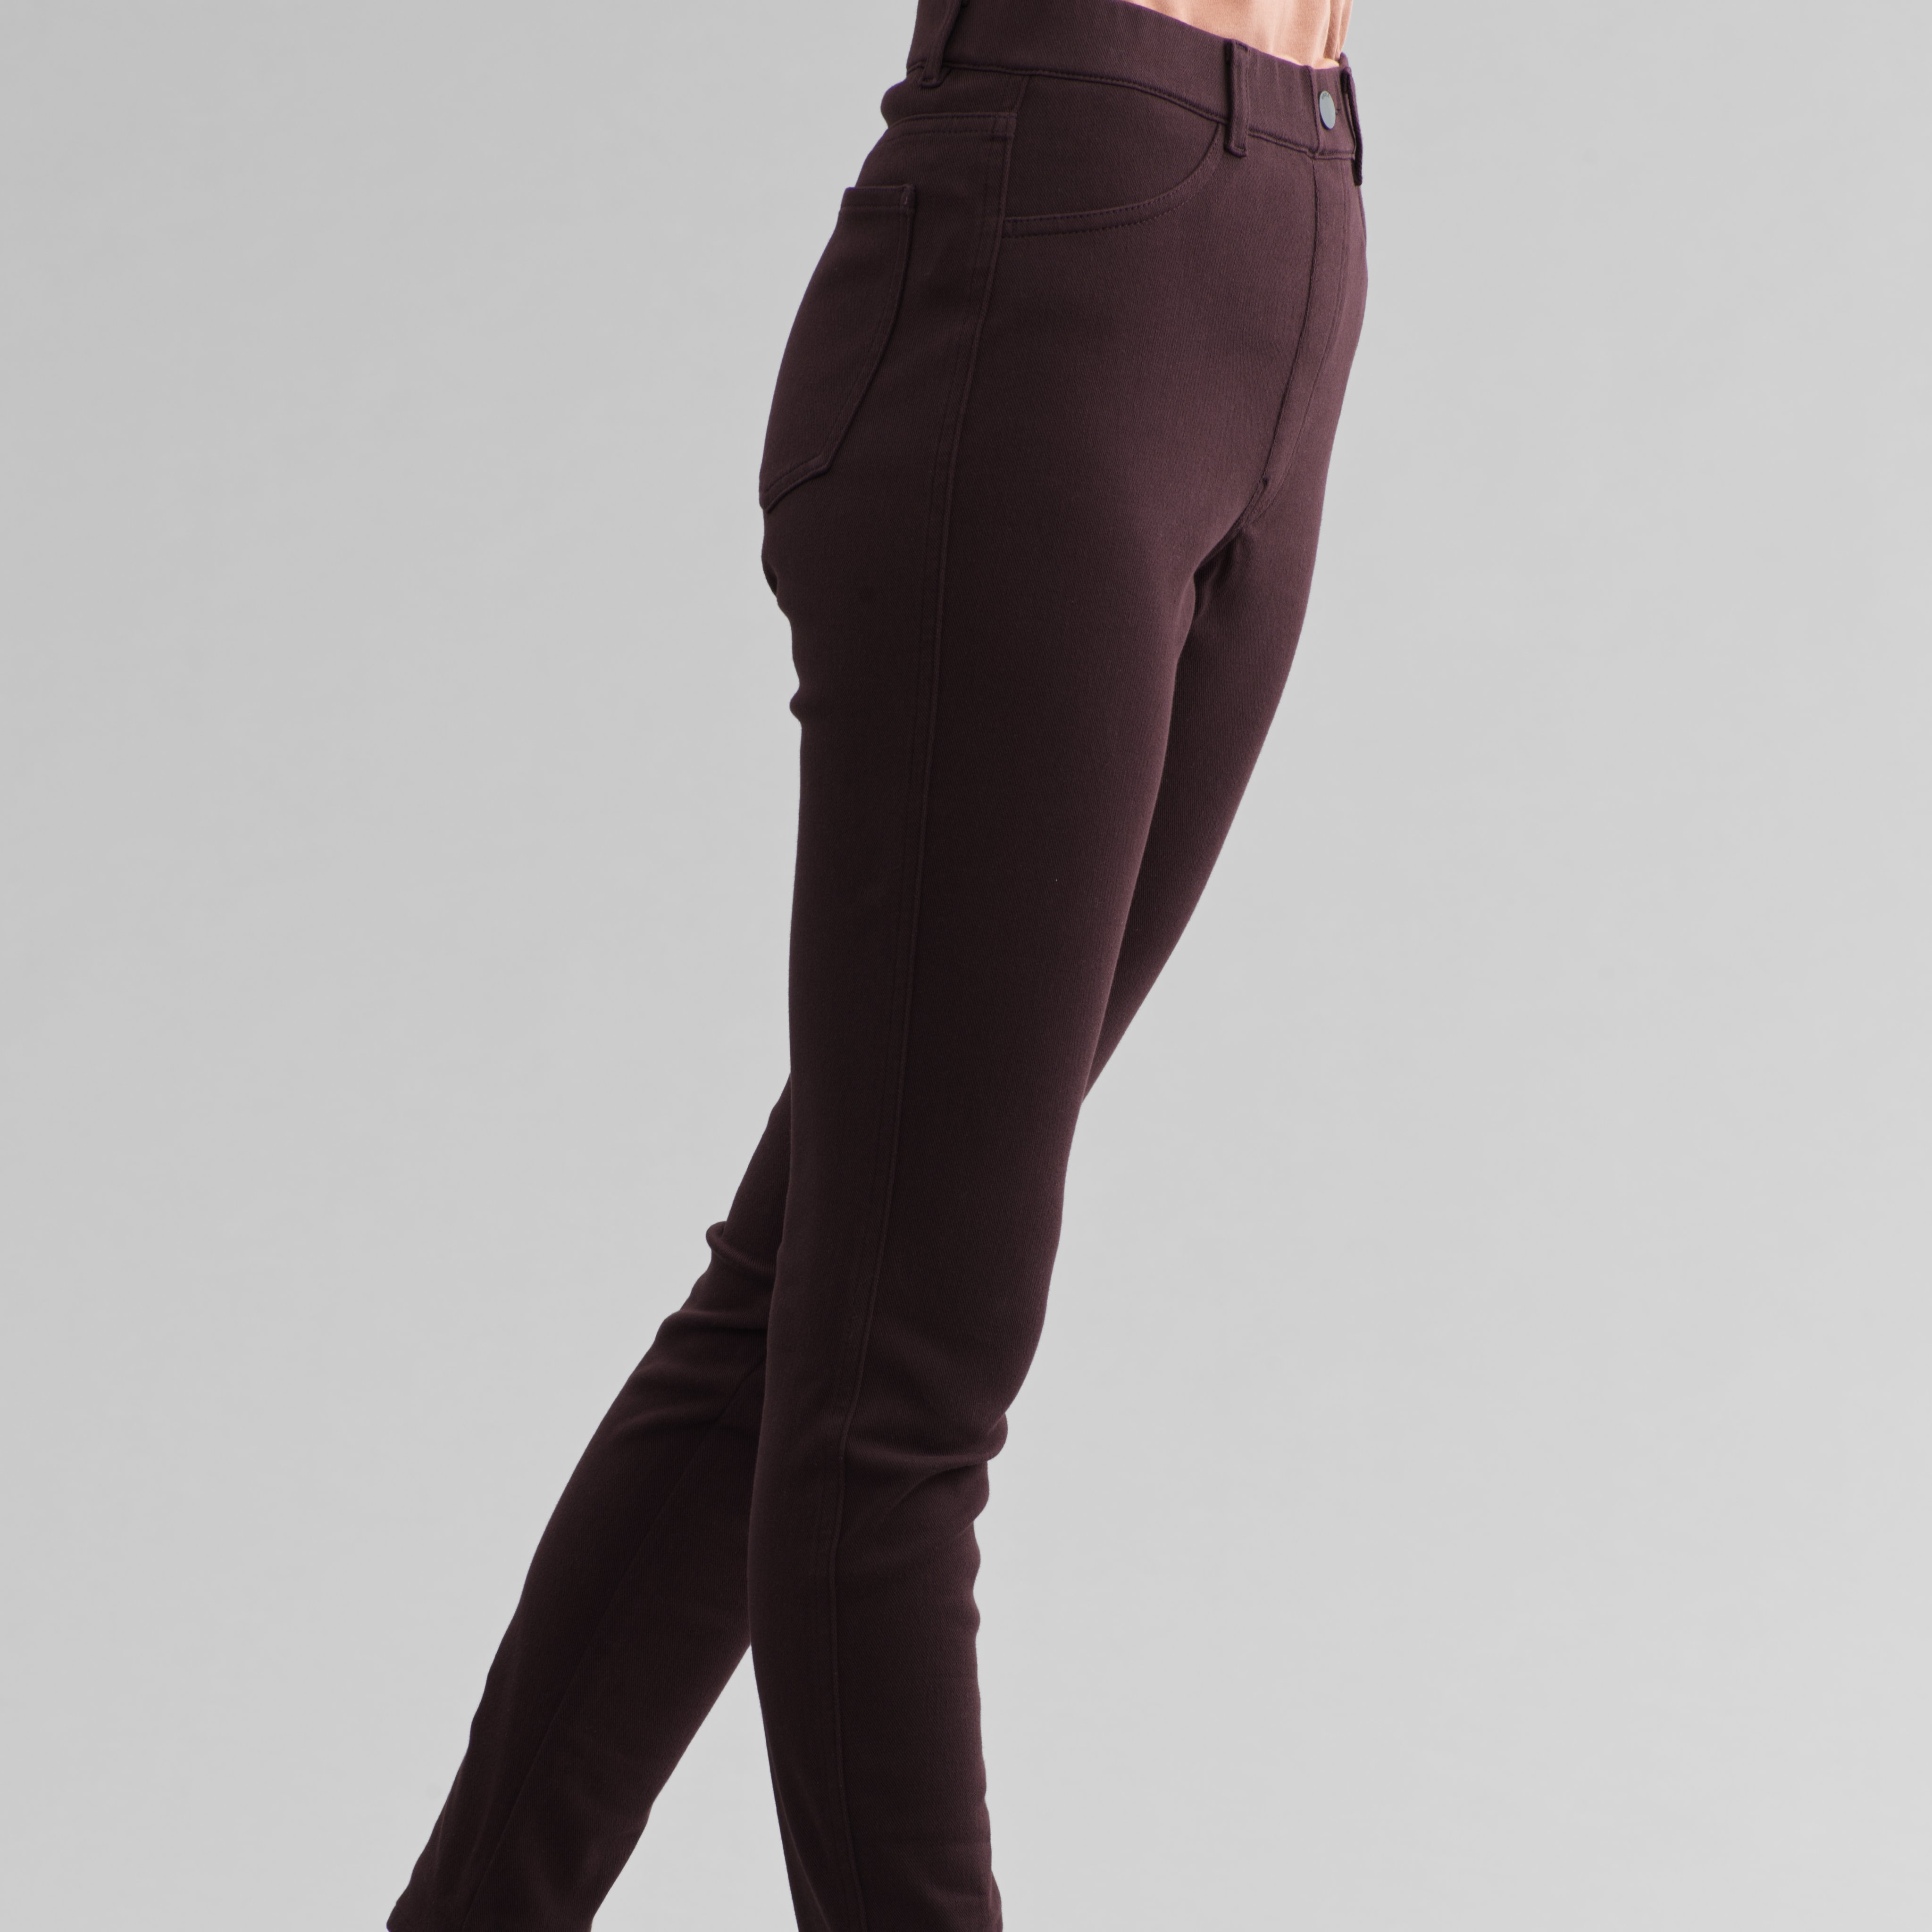 Uniqlo Canada on X: MASTERPIECE: Extra Stretch High Rise Leggings Pants  Comfortable like leggings with the look of genuine denim pants. It has  ultra-stretch for 360-degree comfort and added dry function for